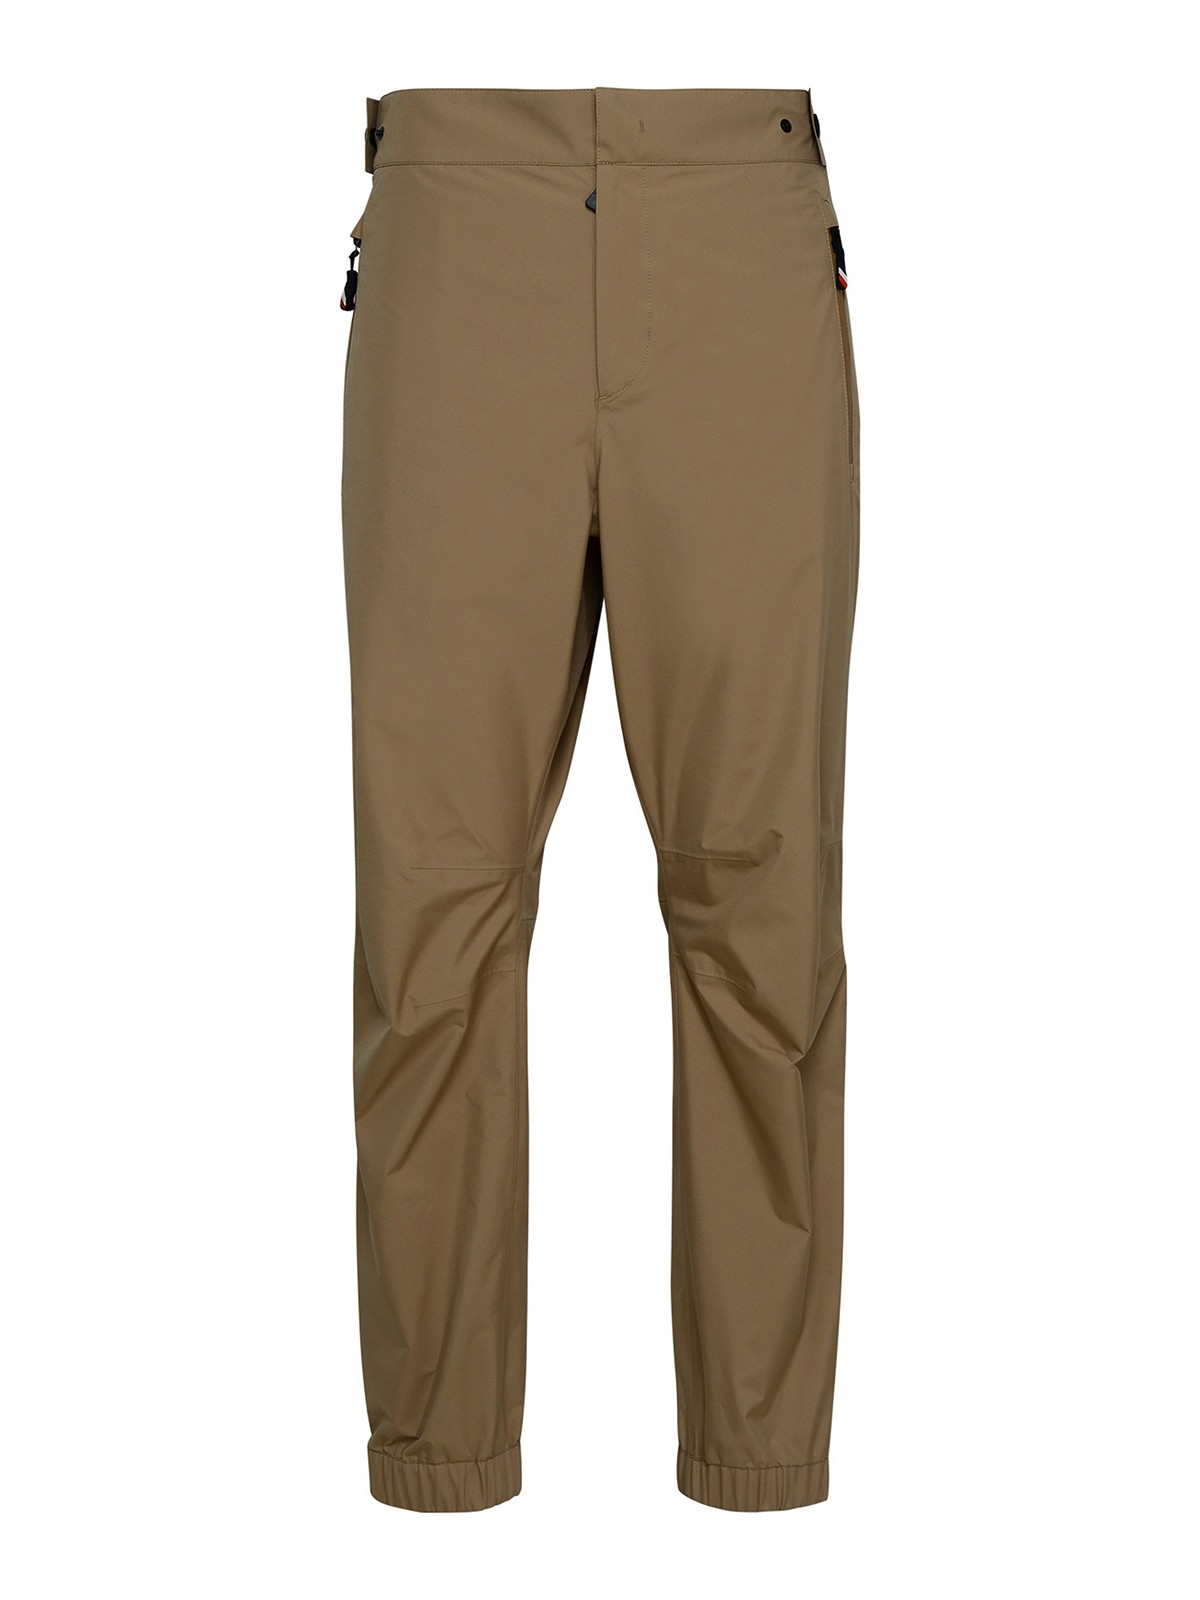 Buy Norrøna Womens Falketind GoreTex Paclite Pants from Outnorth